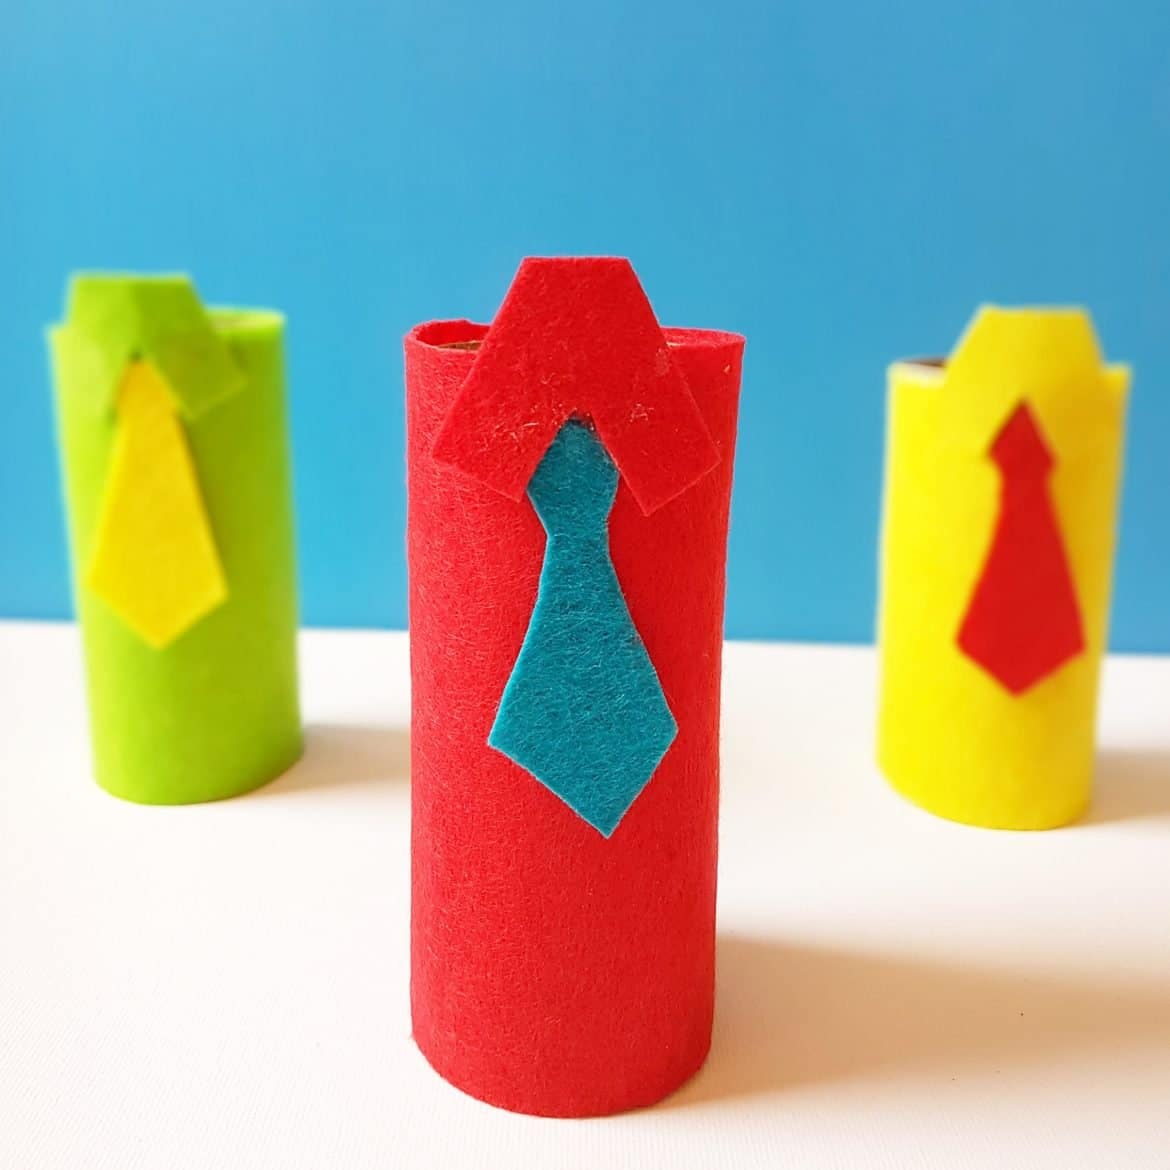 Make this super easy Father's Day Craft using paper roll. #fathersdaycraft #paperrollcraft